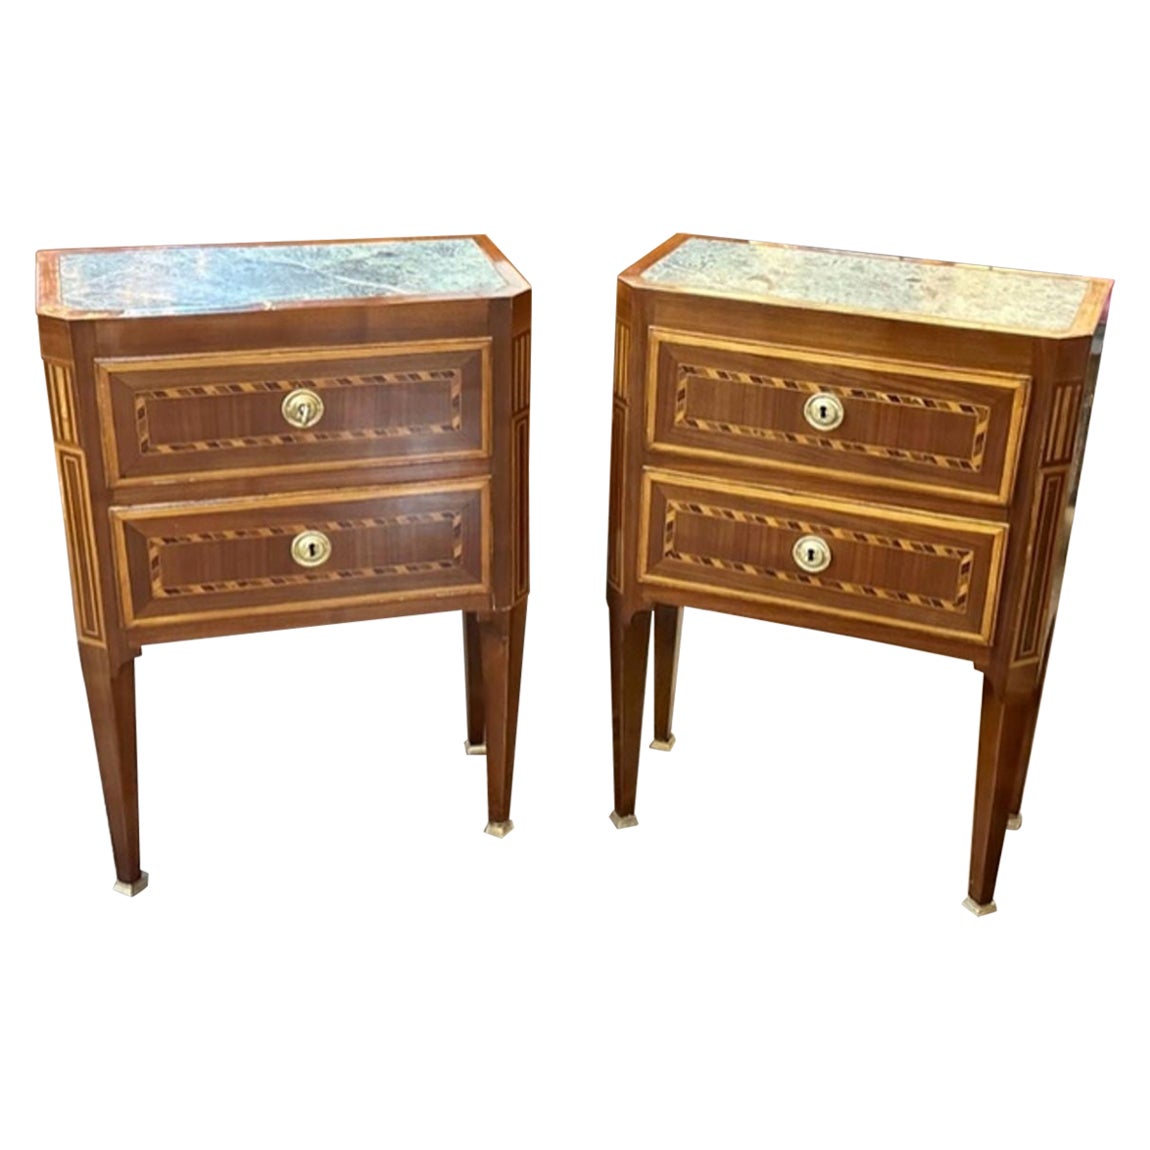 Pair of 19th Century Italian Tables with Marquetry Inlay For Sale